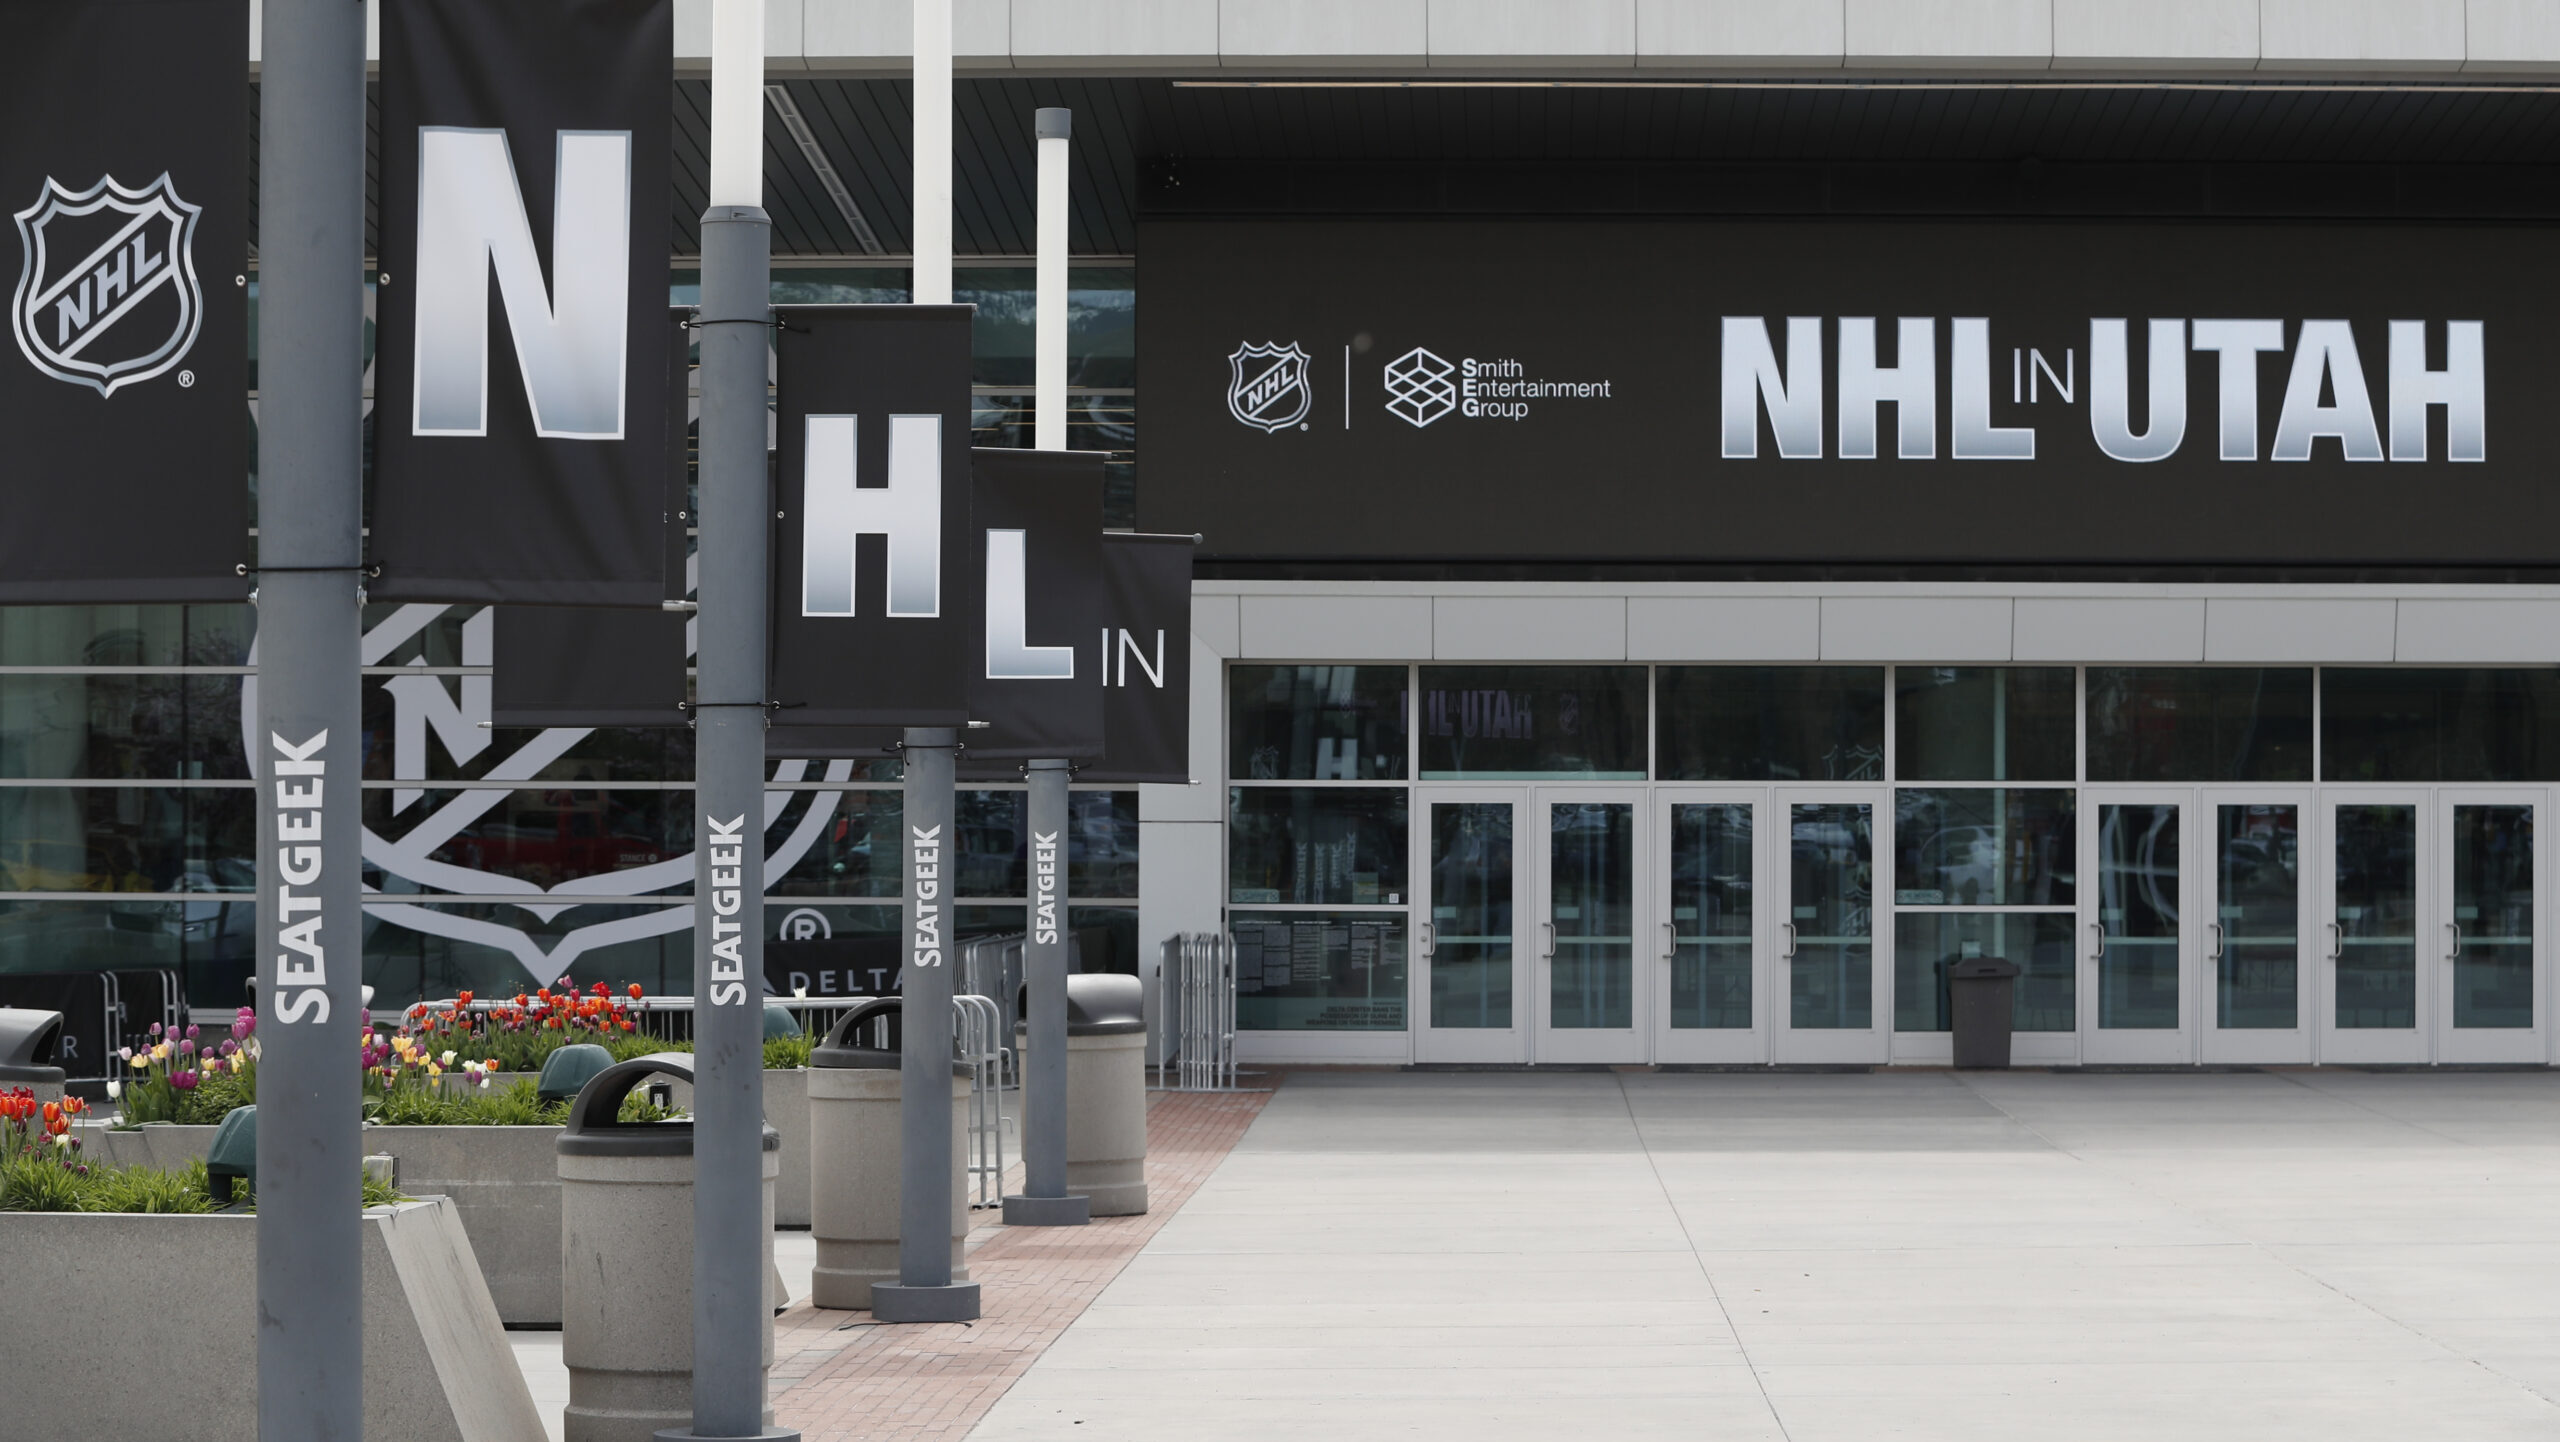 Two New Trademark Applications Submitted For Utah NHL Team Name